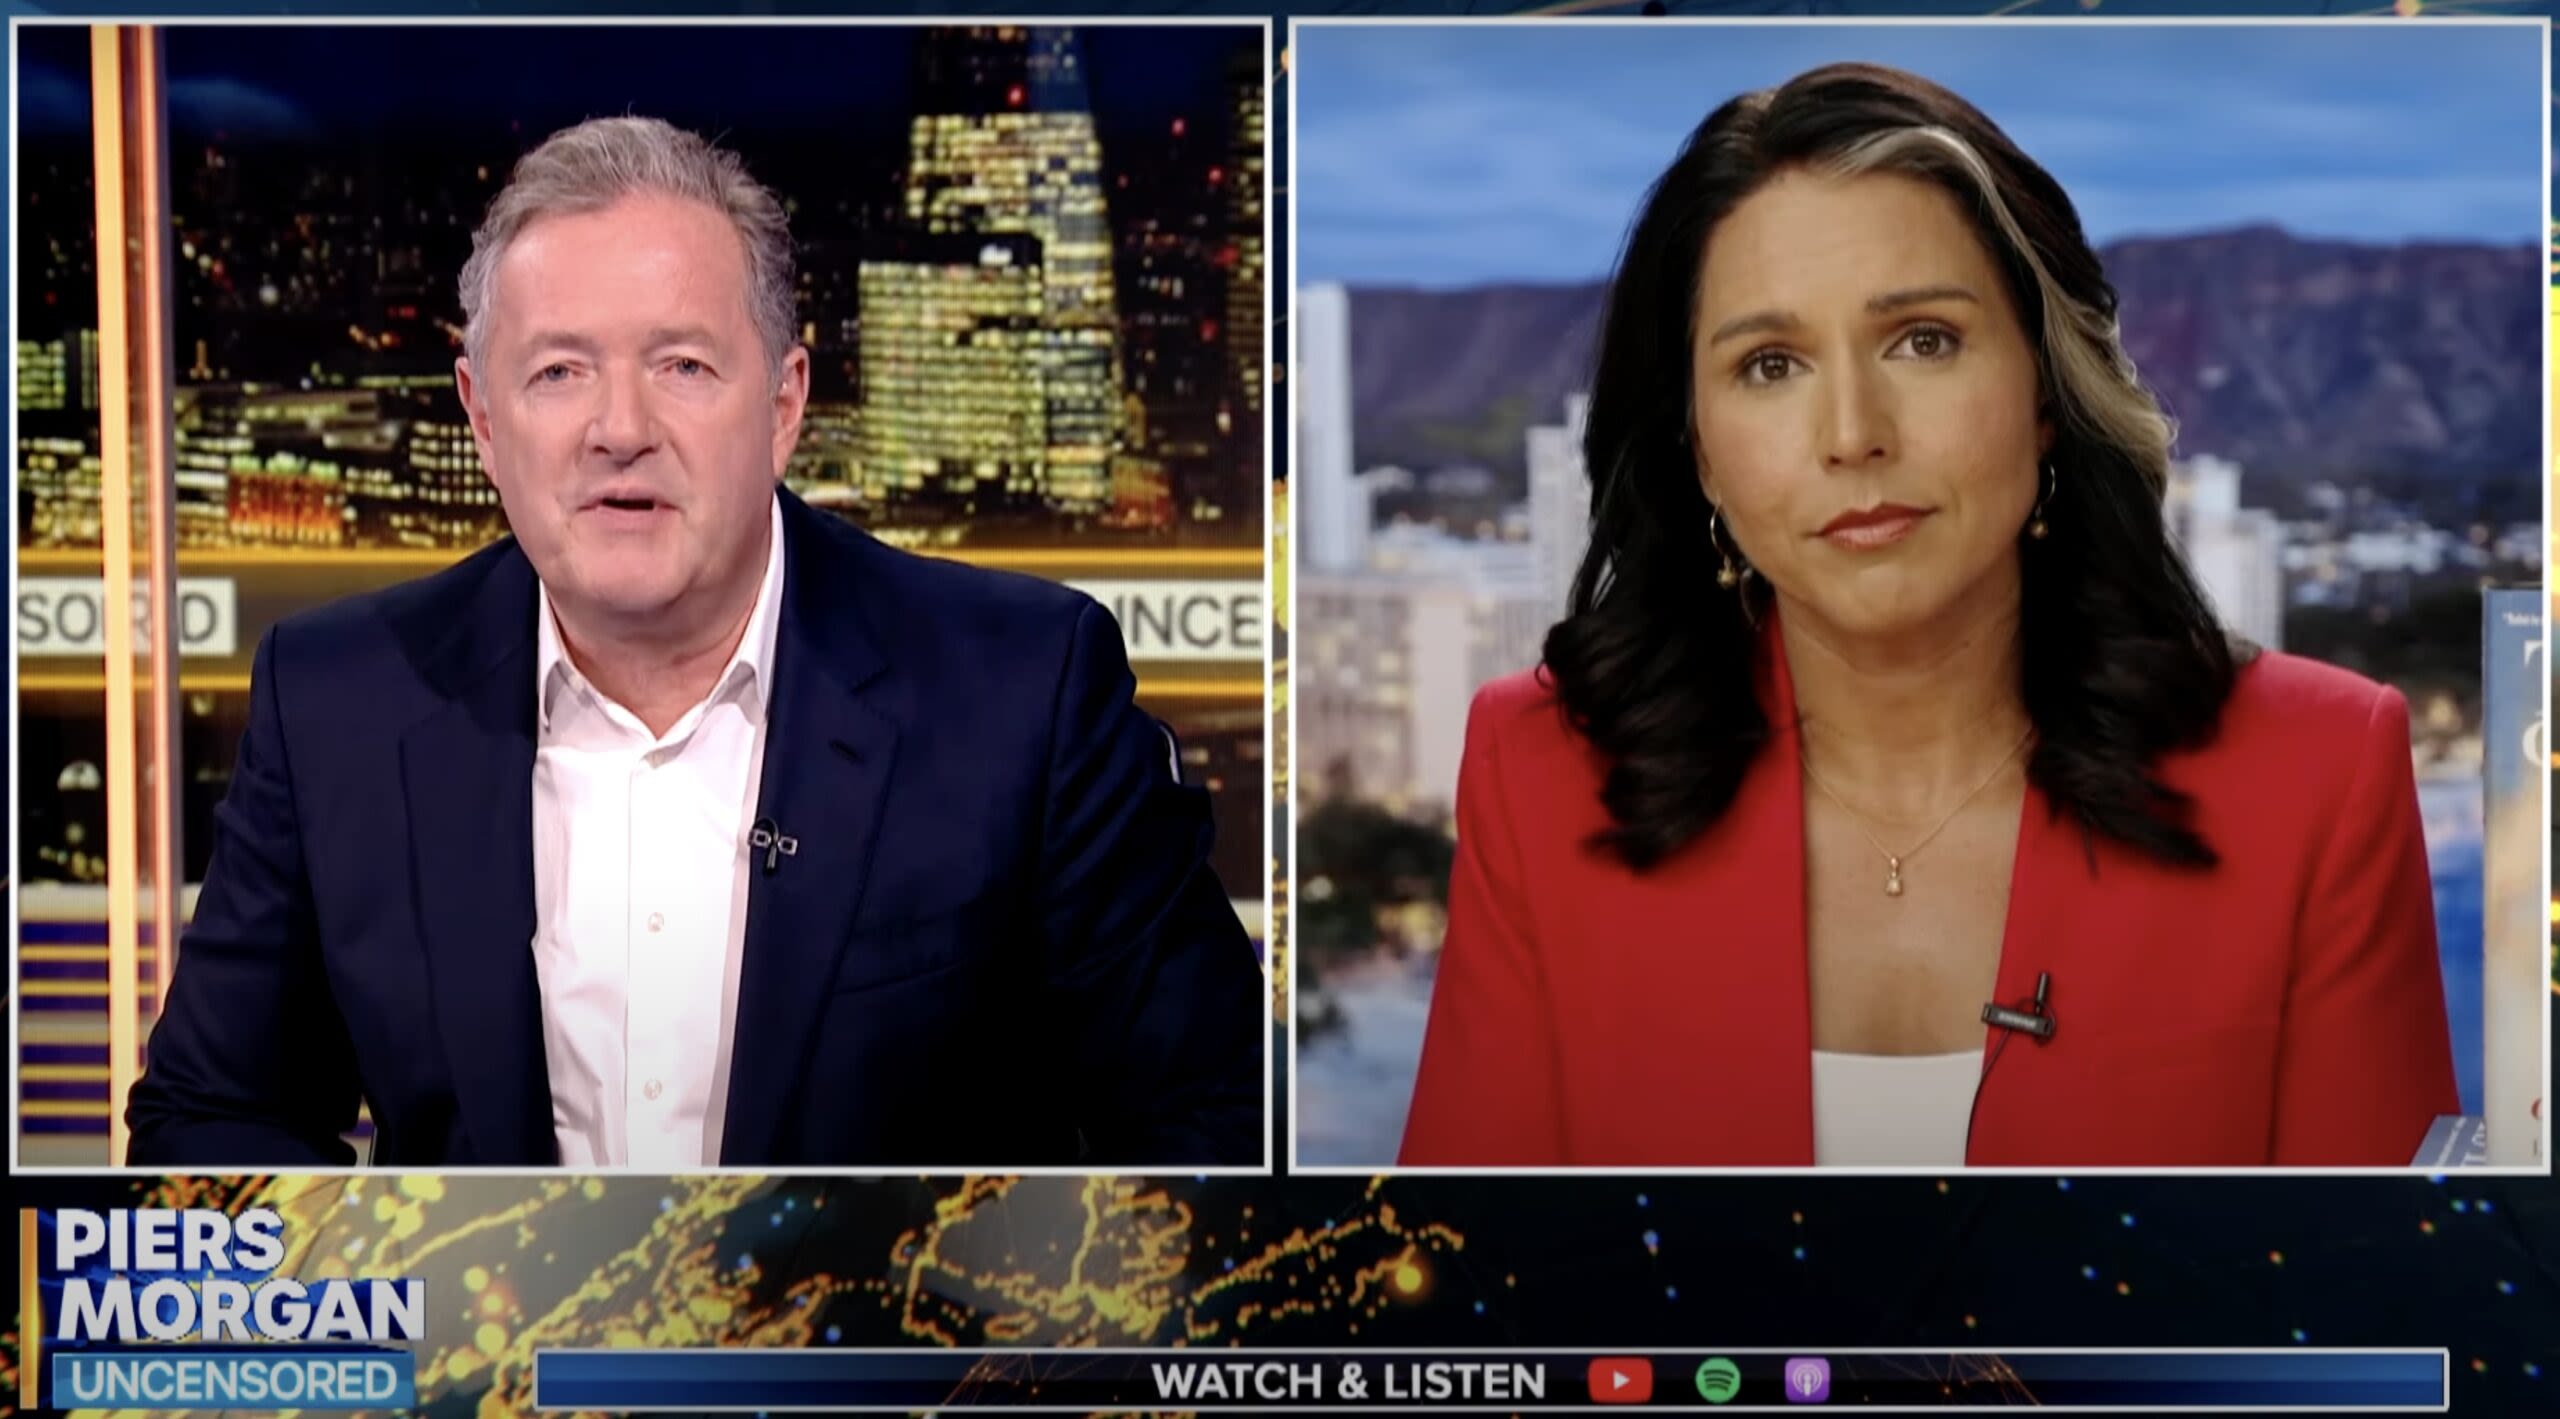 Piers Morgan Asks Tulsi Gabbard If She’s Ever Killed a Dog After Ex-Congresswoman Says She’d be ‘Honored to...